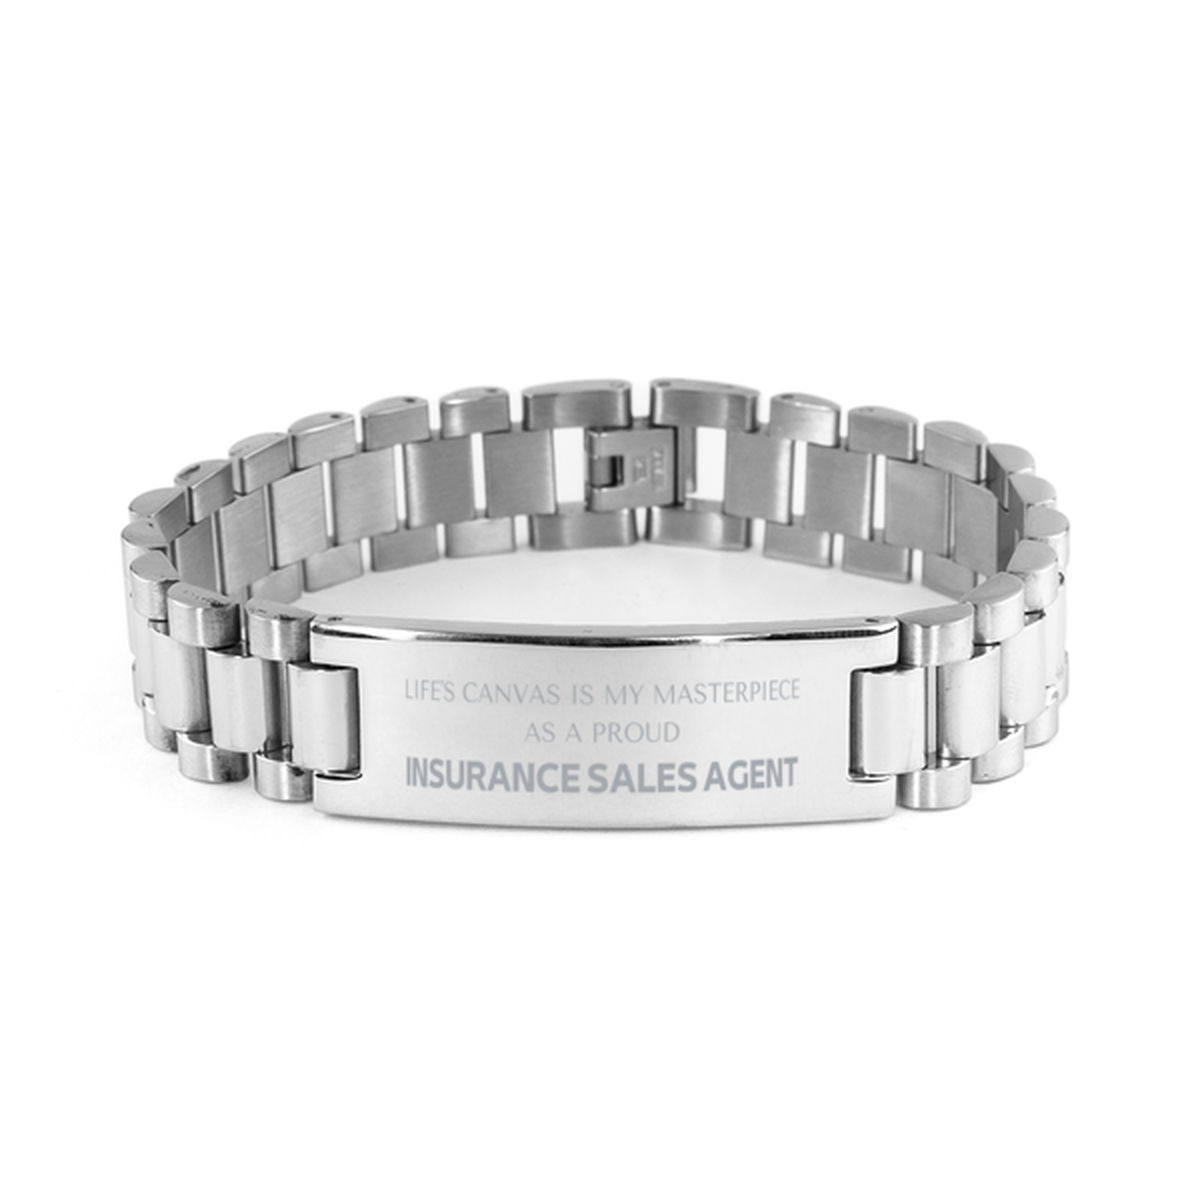 Proud Insurance Sales Agent Gifts, Life's canvas is my masterpiece, Epic Birthday Christmas Unique Ladder Stainless Steel Bracelet For Insurance Sales Agent, Coworkers, Men, Women, Friends